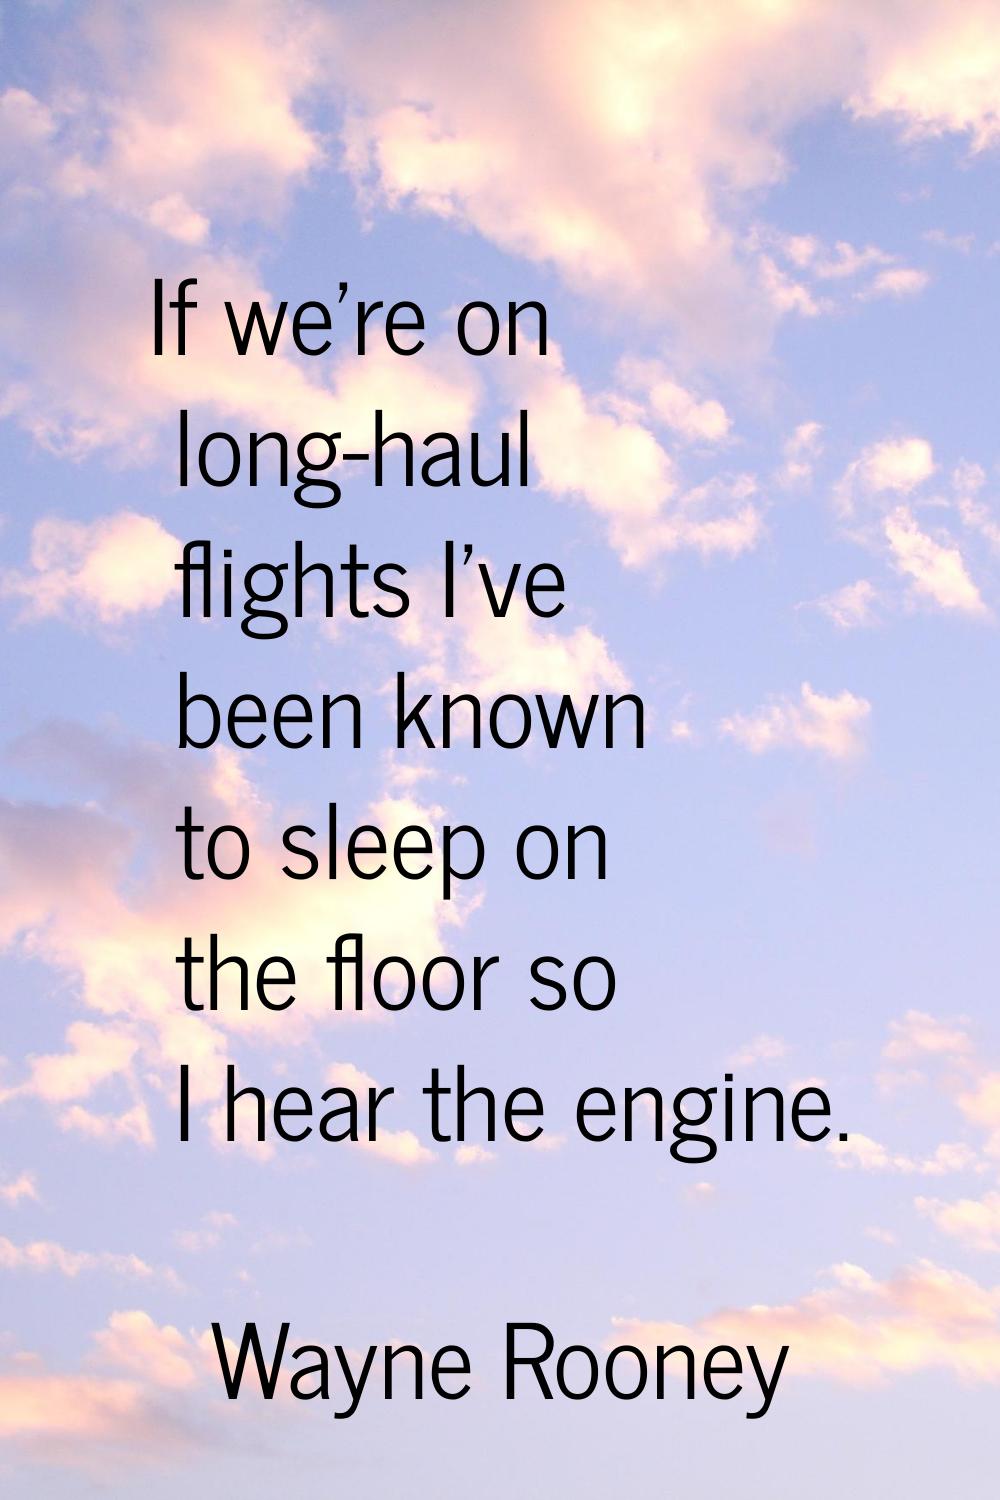 If we're on long-haul flights I've been known to sleep on the floor so I hear the engine.